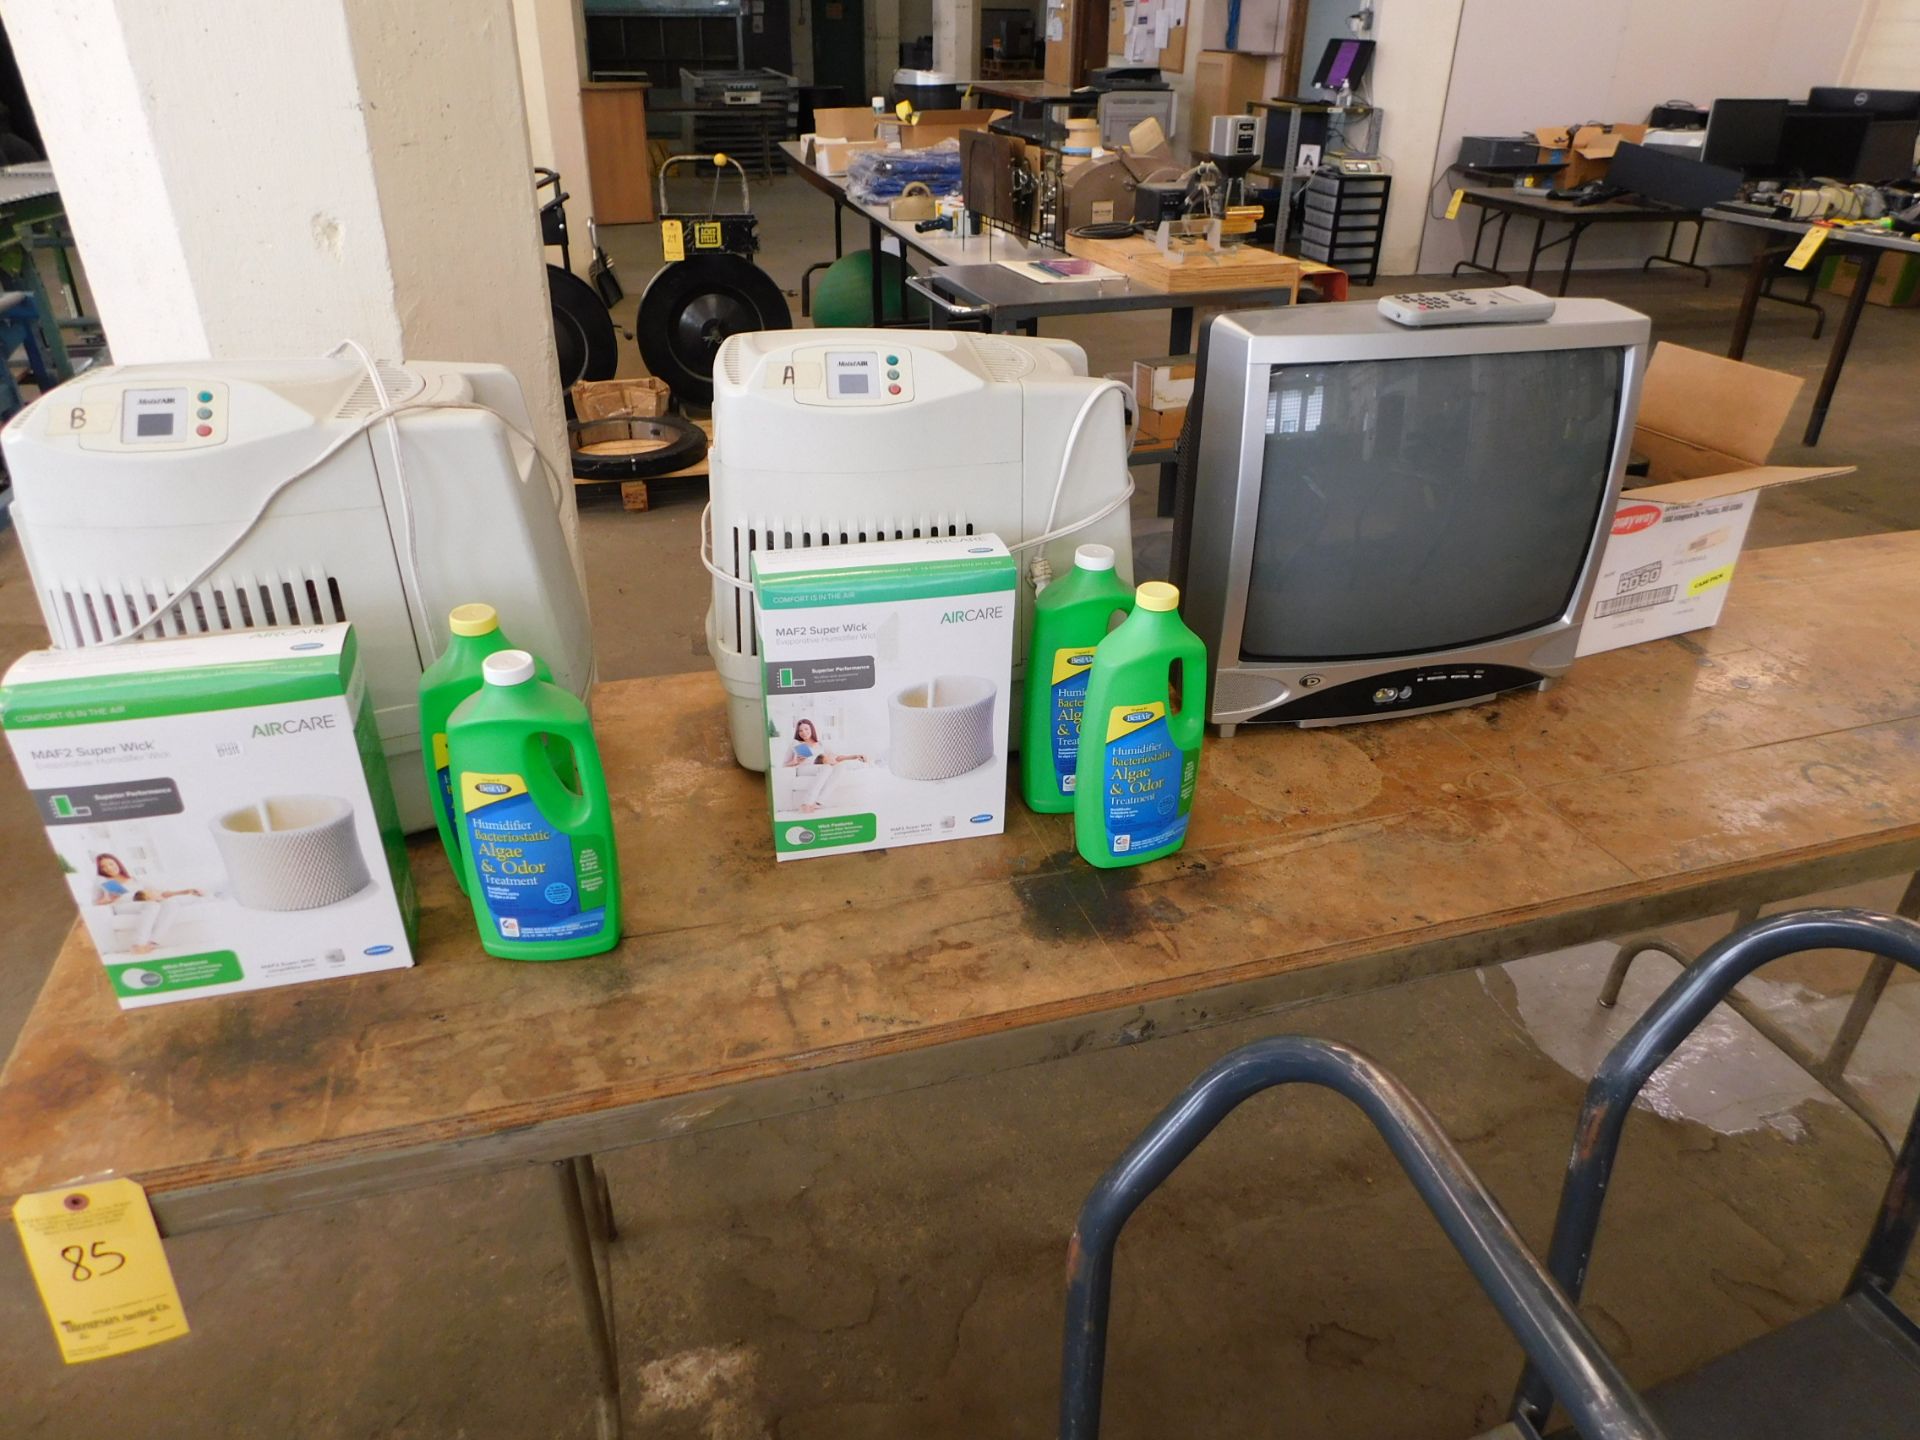 8' Table and Contents, Misc. TV and Spray Cans and (2) Moist Air Humidifiers